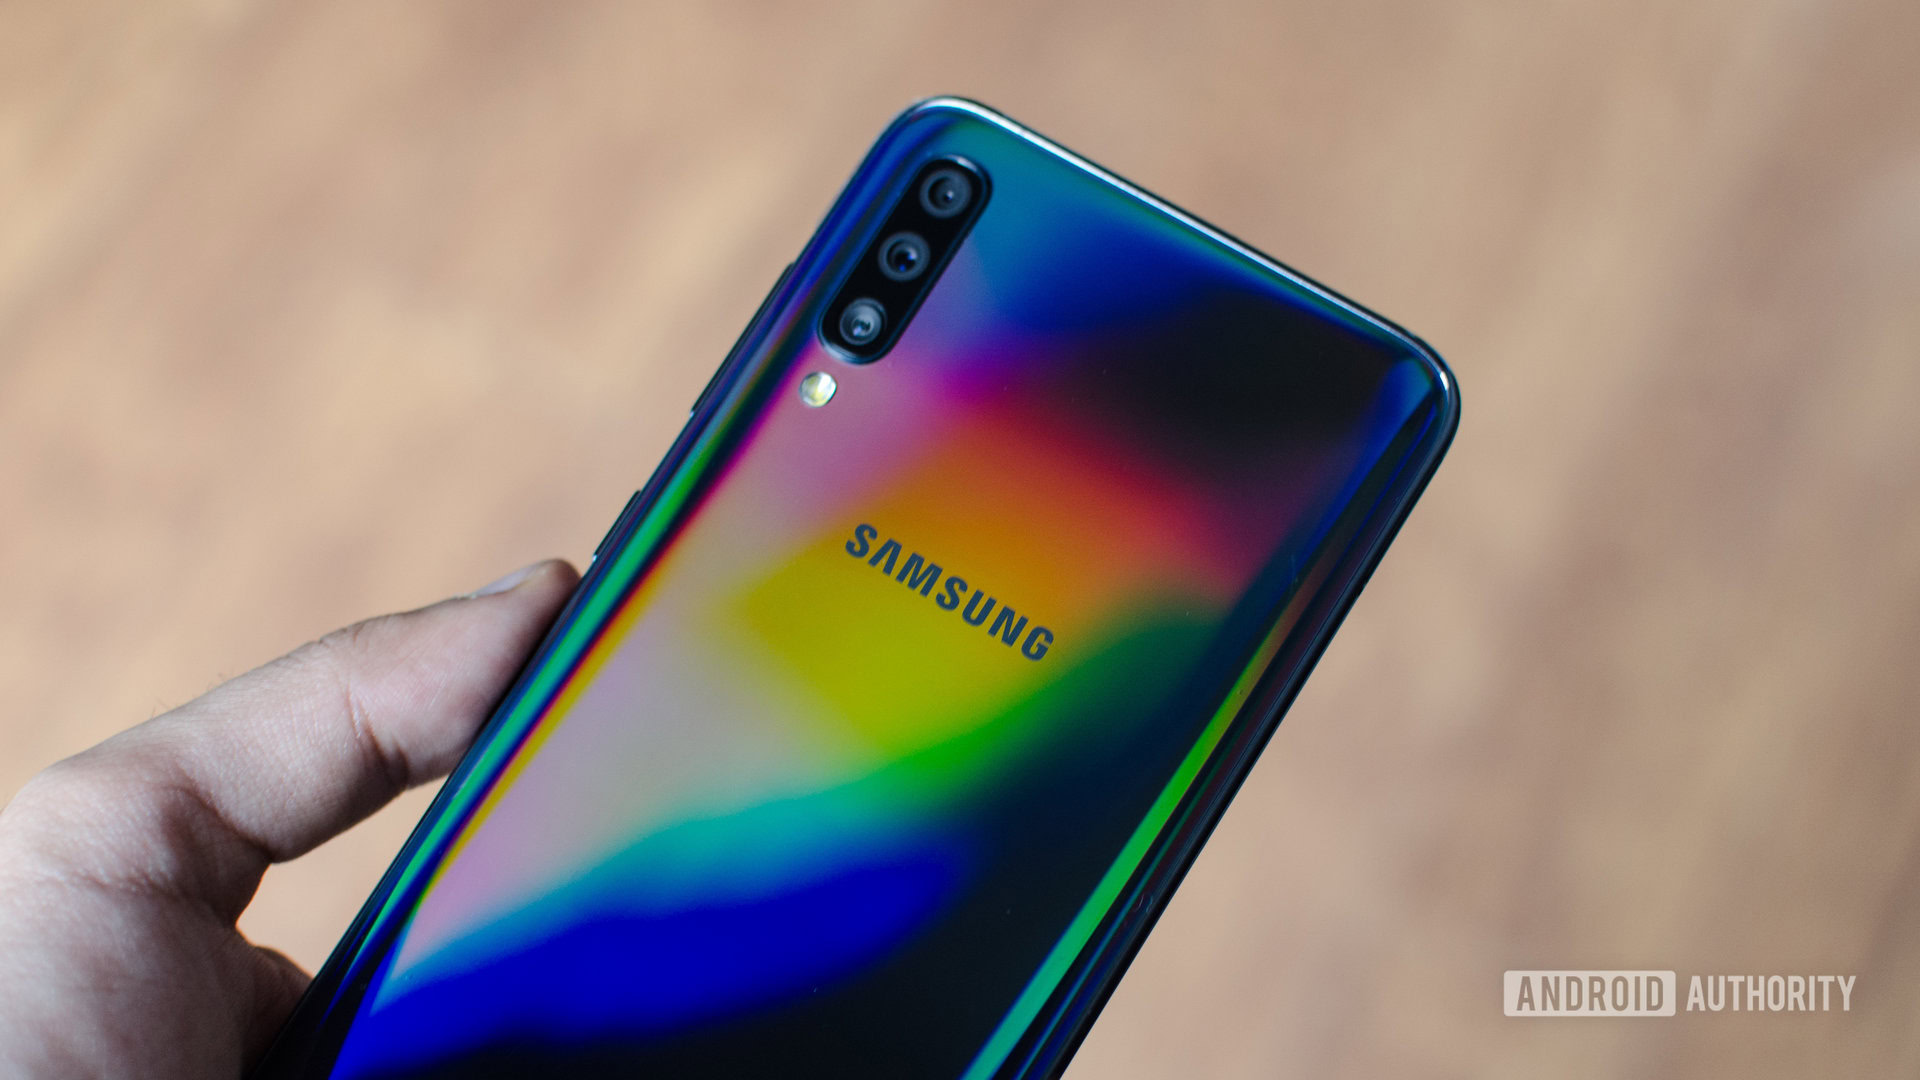 bijgeloof Reserveren Aardrijkskunde Samsung Galaxy A70 review: Quality hardware, but there's better to be had -  Android Authority